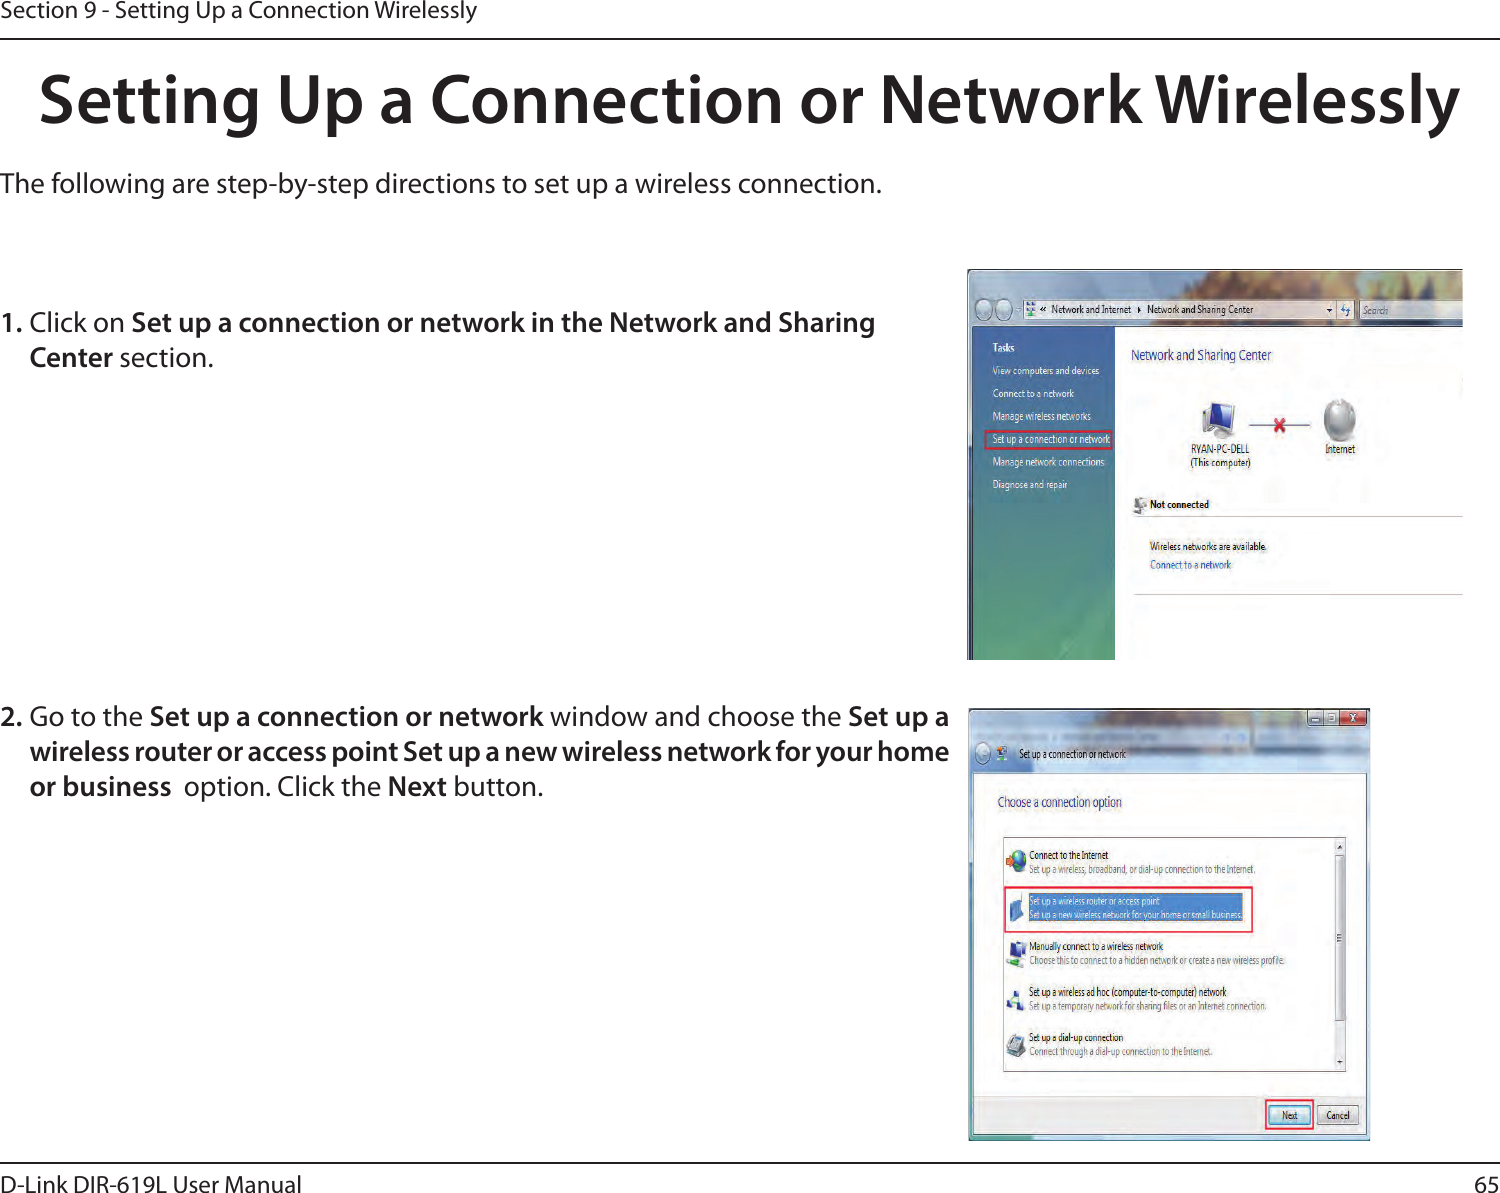 65D-Link DIR-619L User ManualSection 9 - Setting Up a Connection WirelesslySetting Up a Connection or Network WirelesslyThe following are step-by-step directions to set up a wireless connection.2. Go to the Set up a connection or network window and choose the Set up a wireless router or access point Set up a new wireless network for your home or business  option. Click the Next button. 1. Click on Set up a connection or network in the Network and Sharing Center section. 